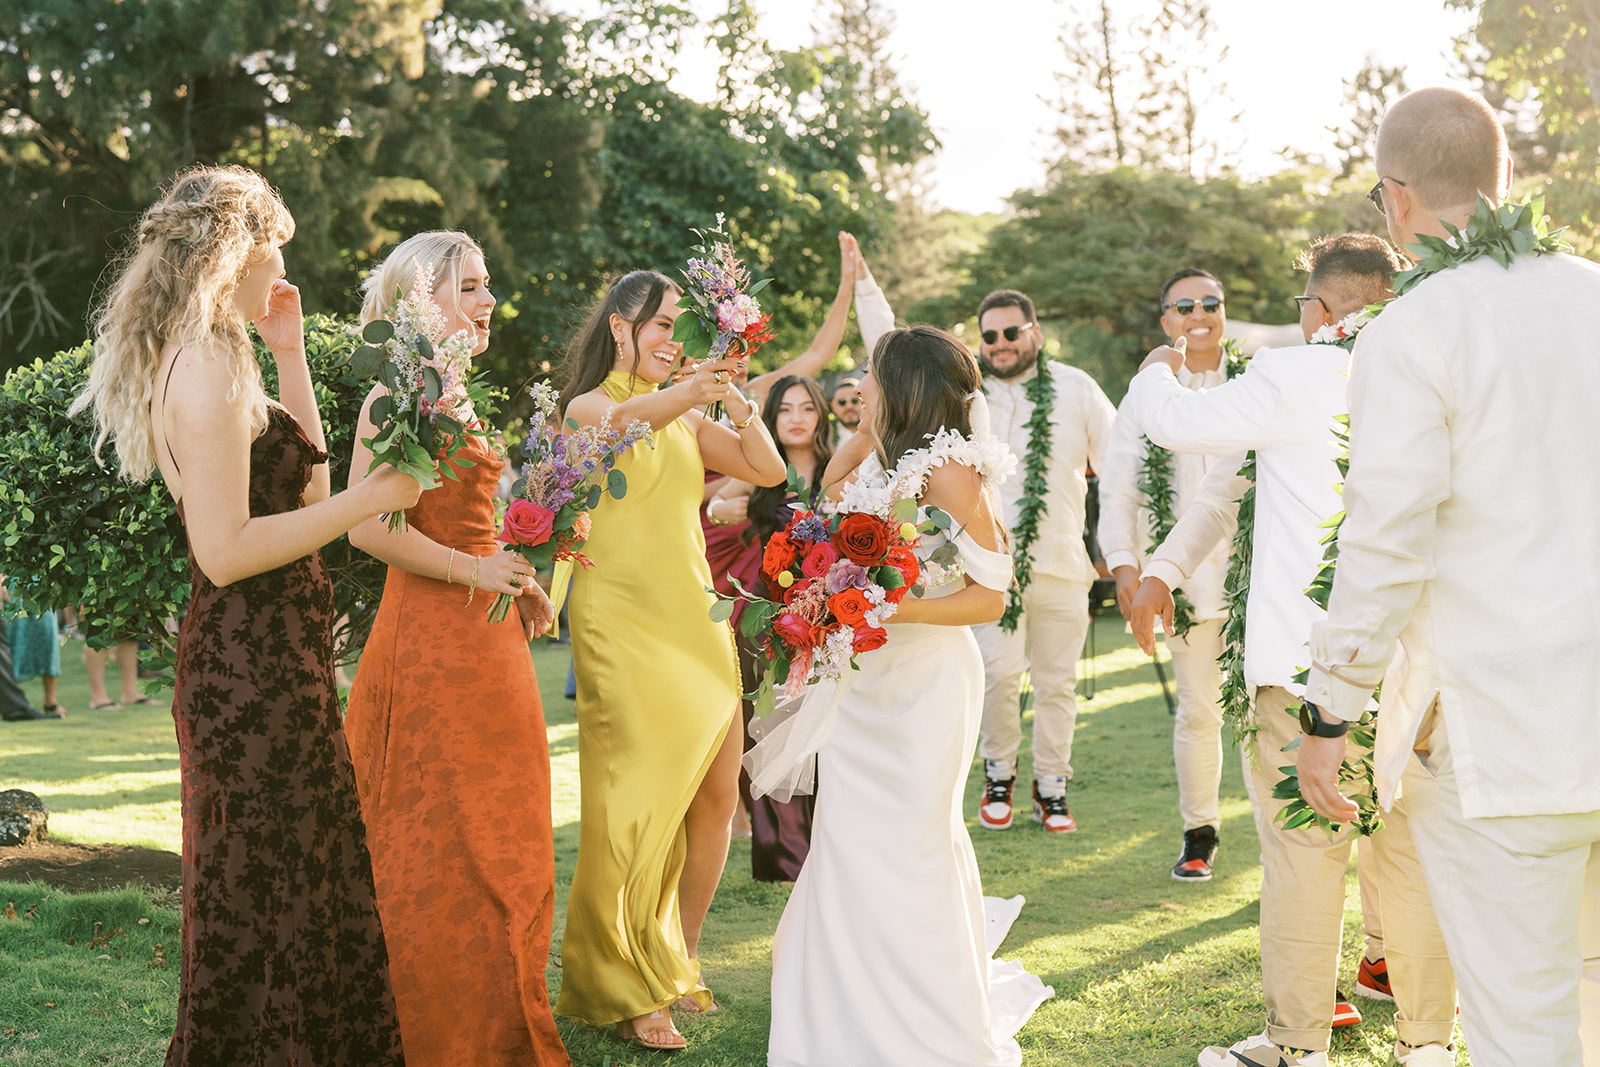 A joyful outdoor wedding scene with well-dressed guests congratulating the bride and groom taken by Megan Moura Wedding